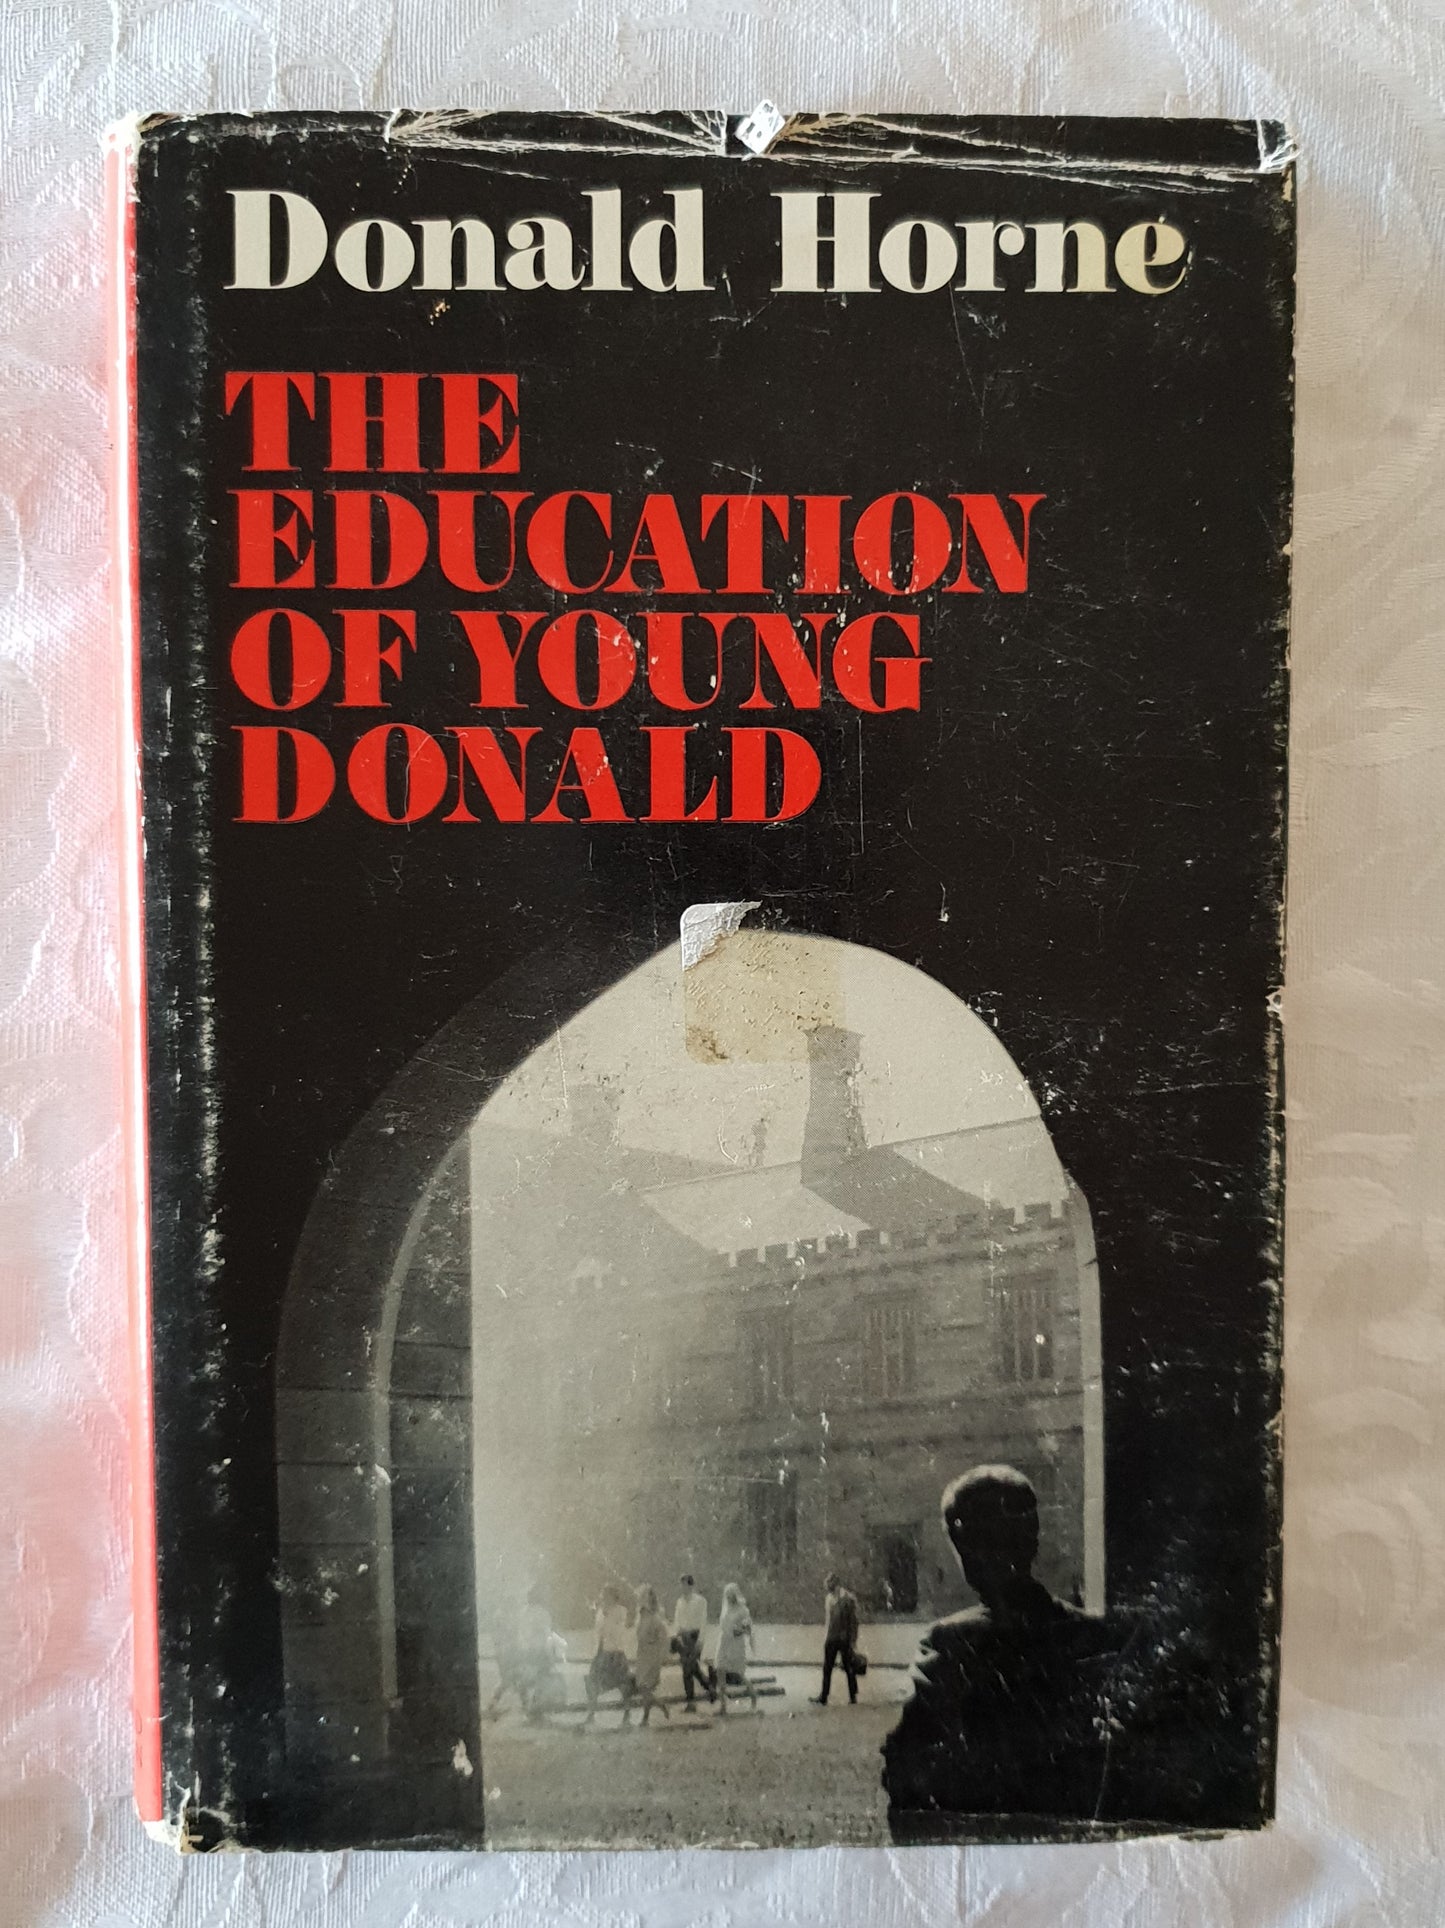 The Education of Young Donald by Donald Horne